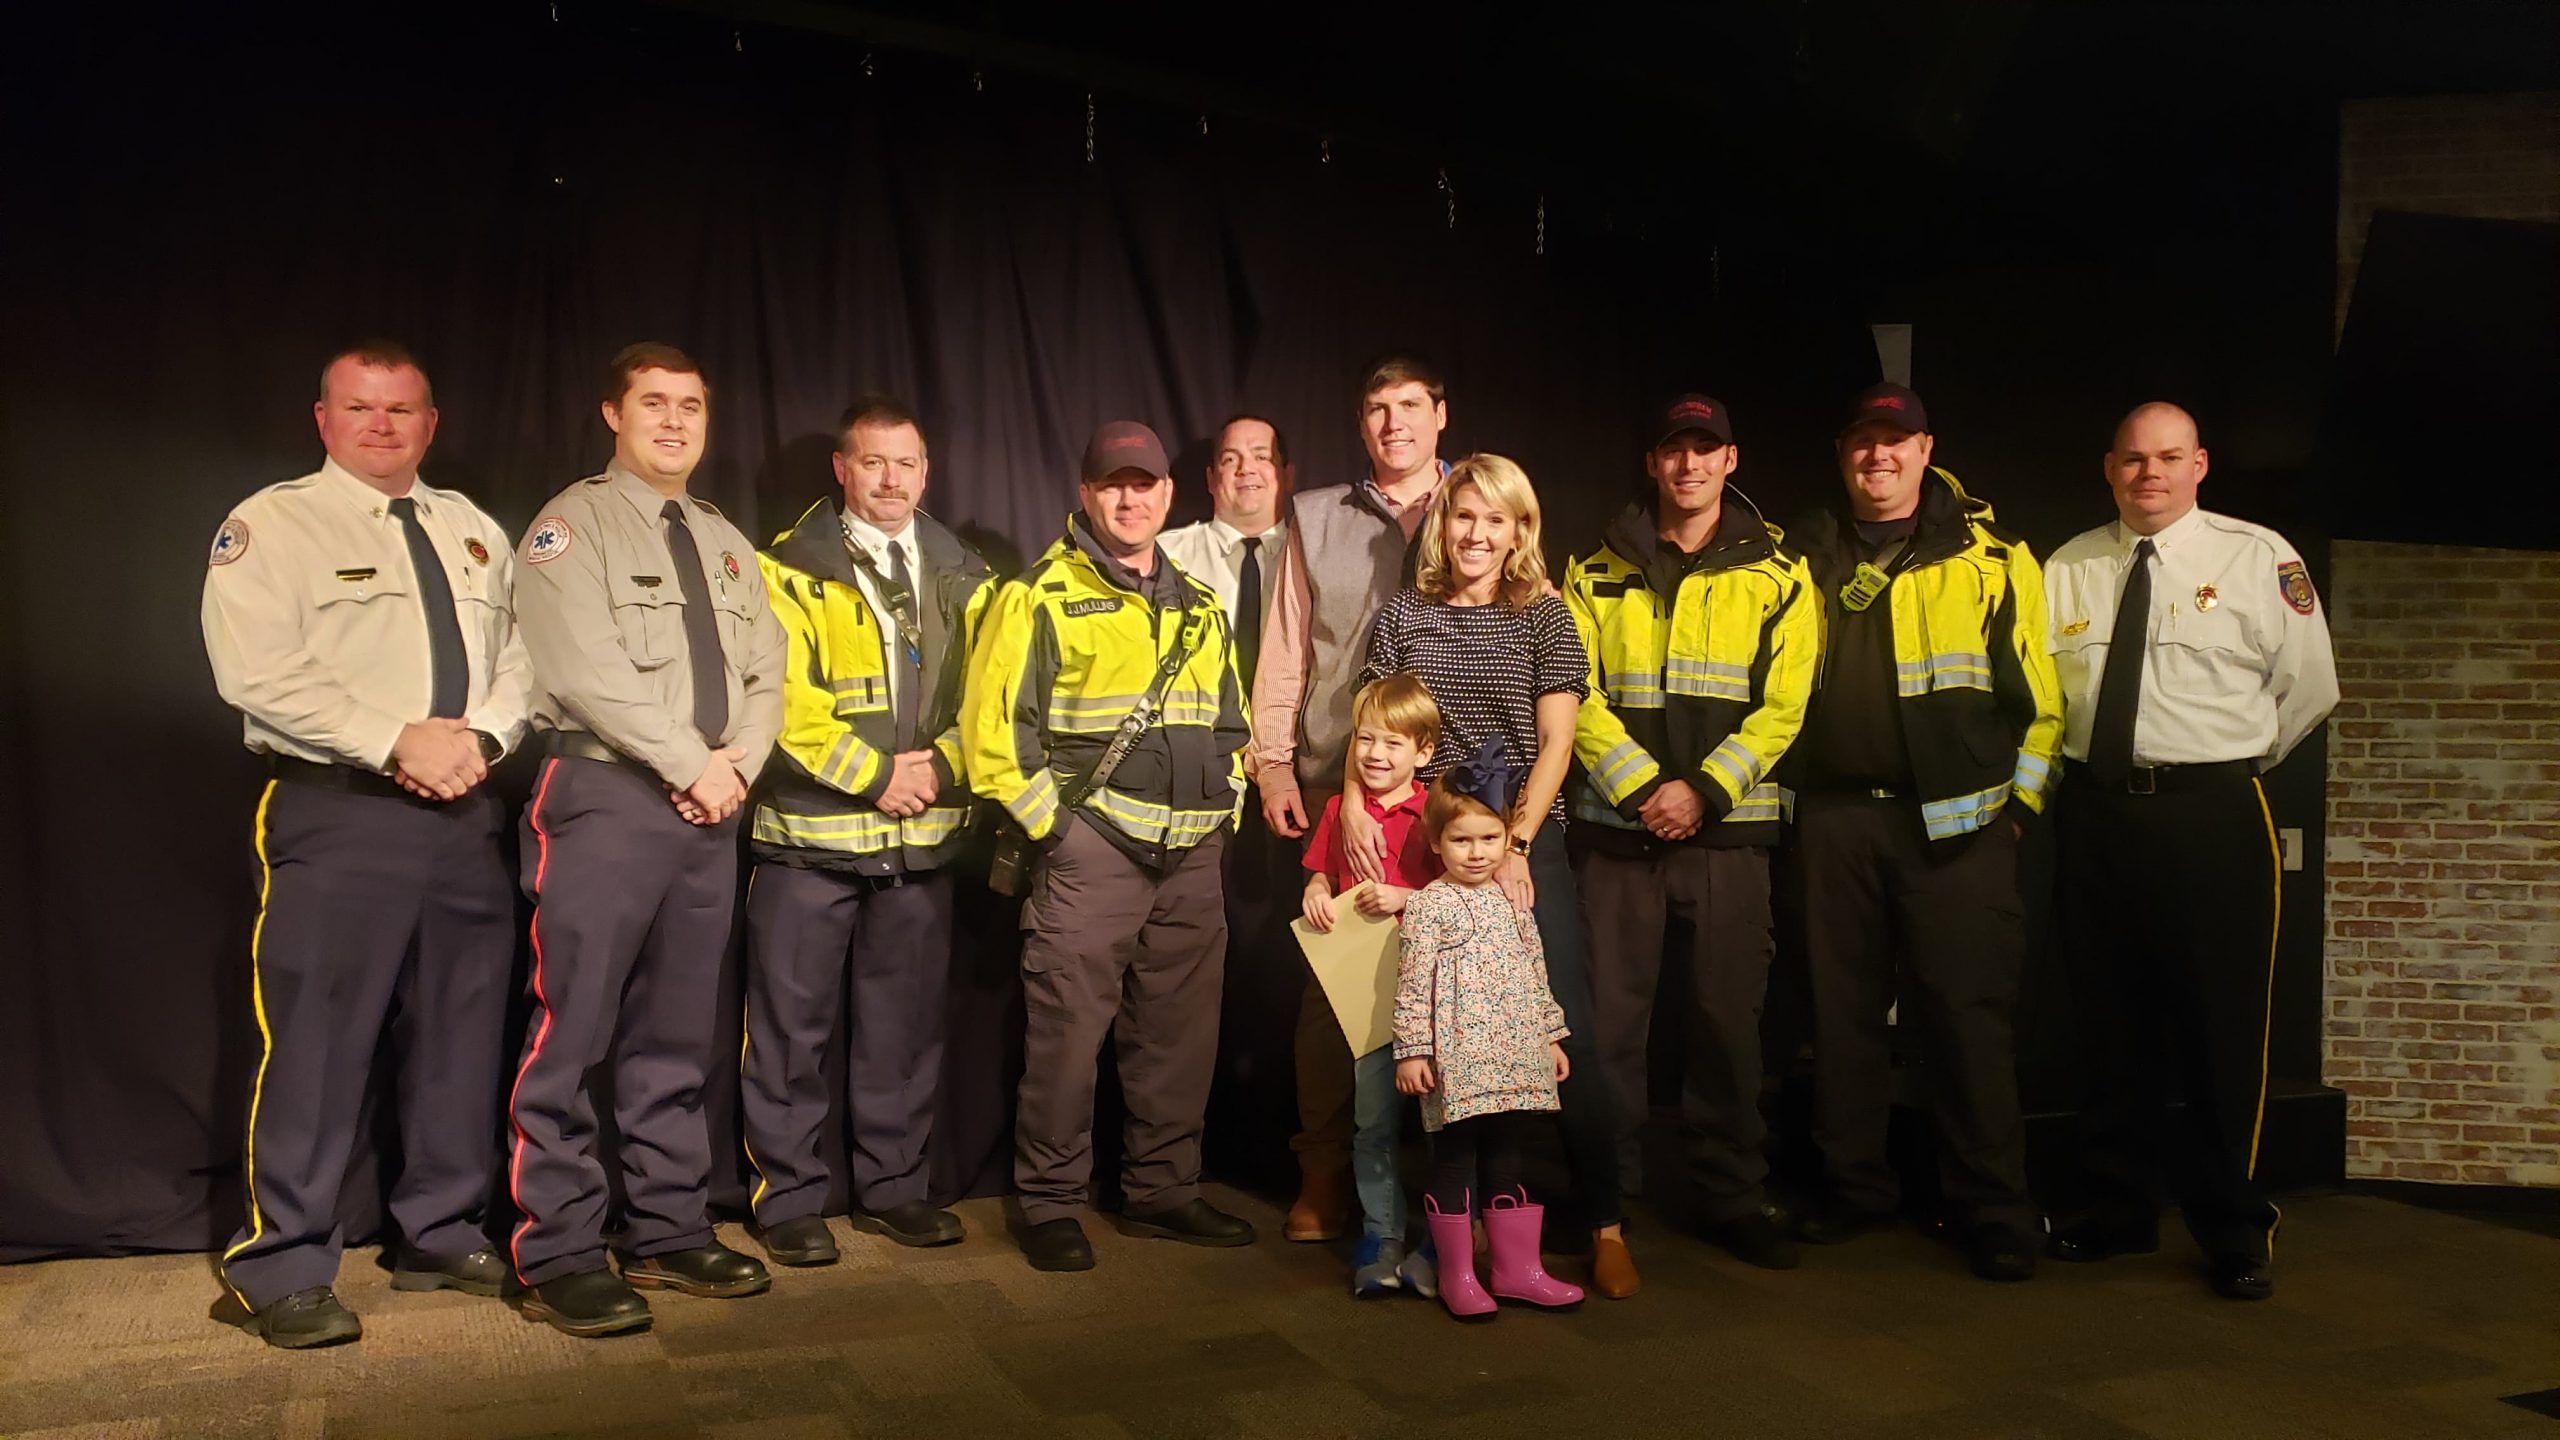 Trussville Fire and Rescue honors 5-year-old who saved little sister from house fire